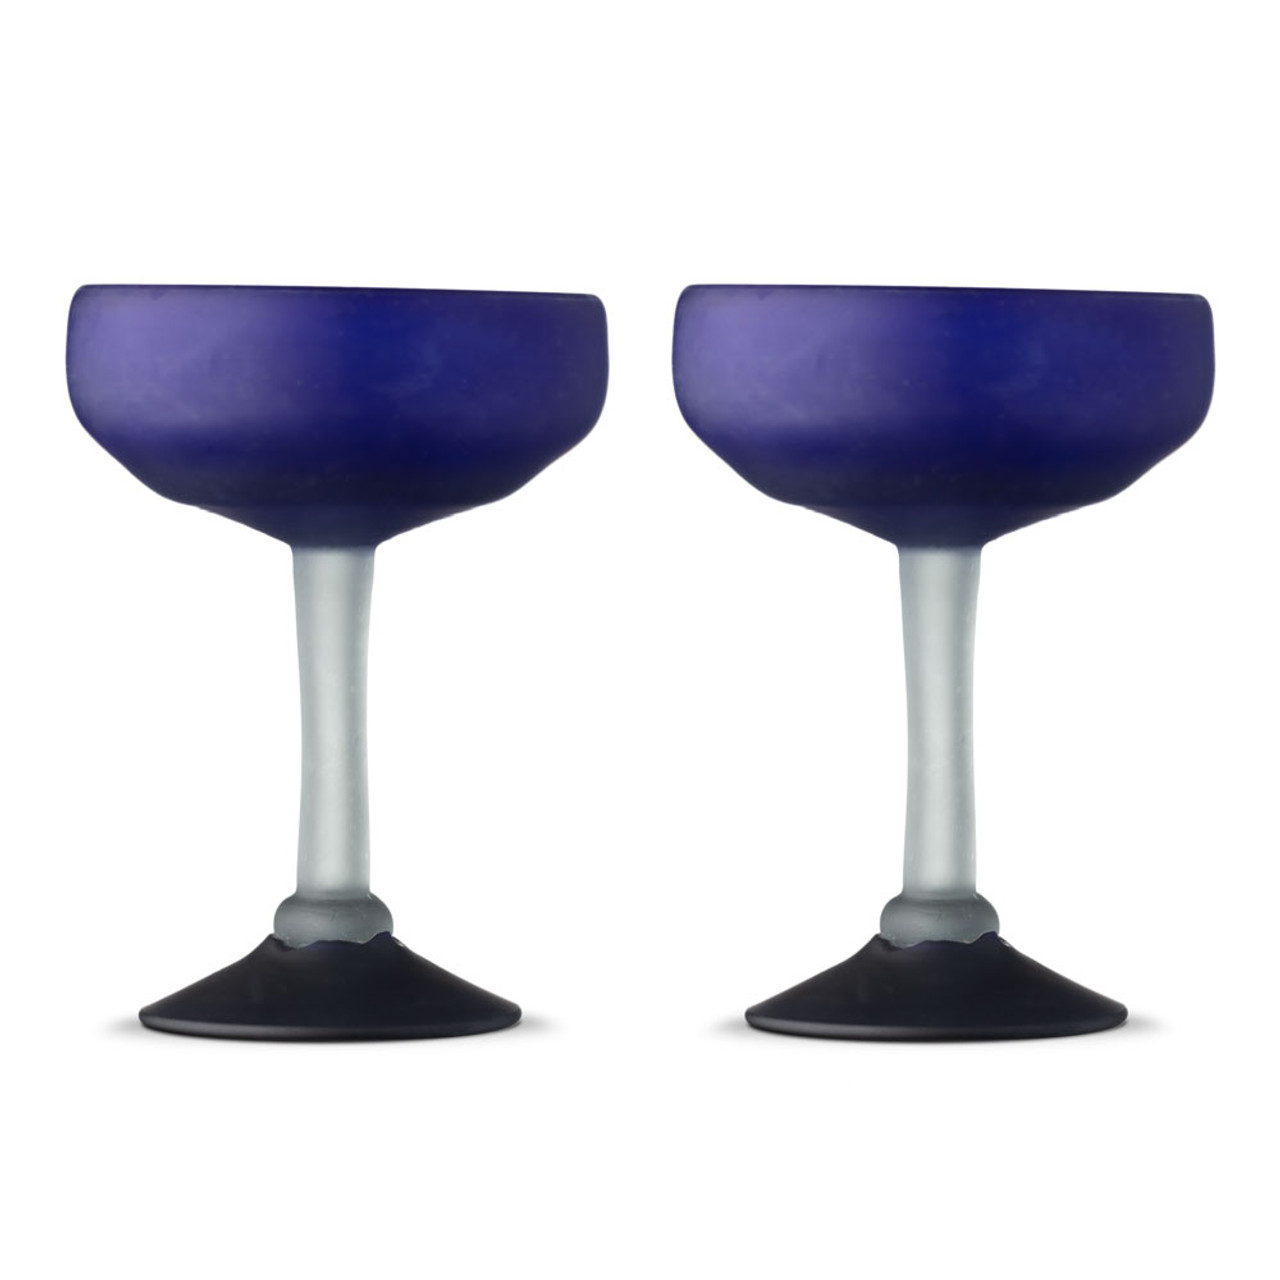 https://cdn11.bigcommerce.com/s-cznxq08r7/images/stencil/1280x1280/products/4772/13385/A10035-1-Hand-Blown-Frosted-Cobalt-Blue-Margarita-Glasses-10-oz-Set-of-2-02__86065.1614028756.jpg?c=1